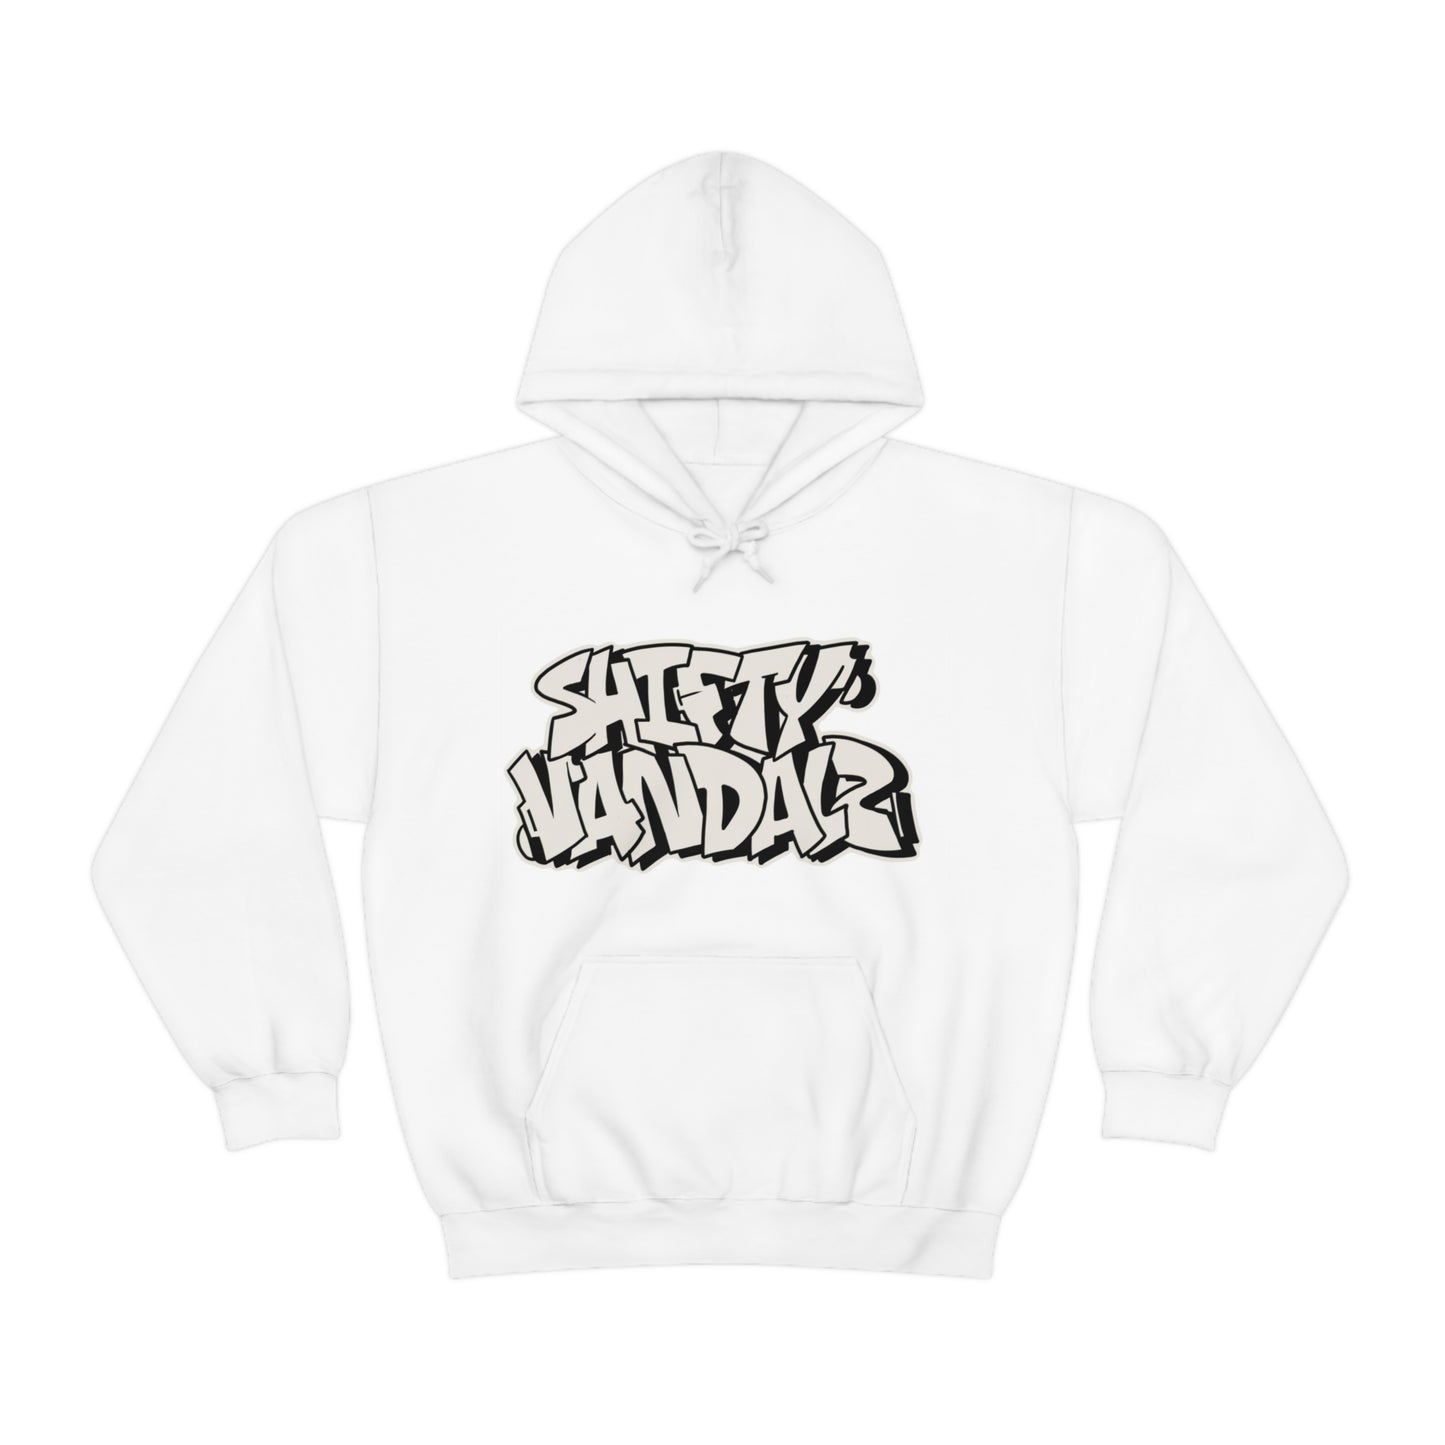 Offficial Shifty vandalz hoody(Images switched)